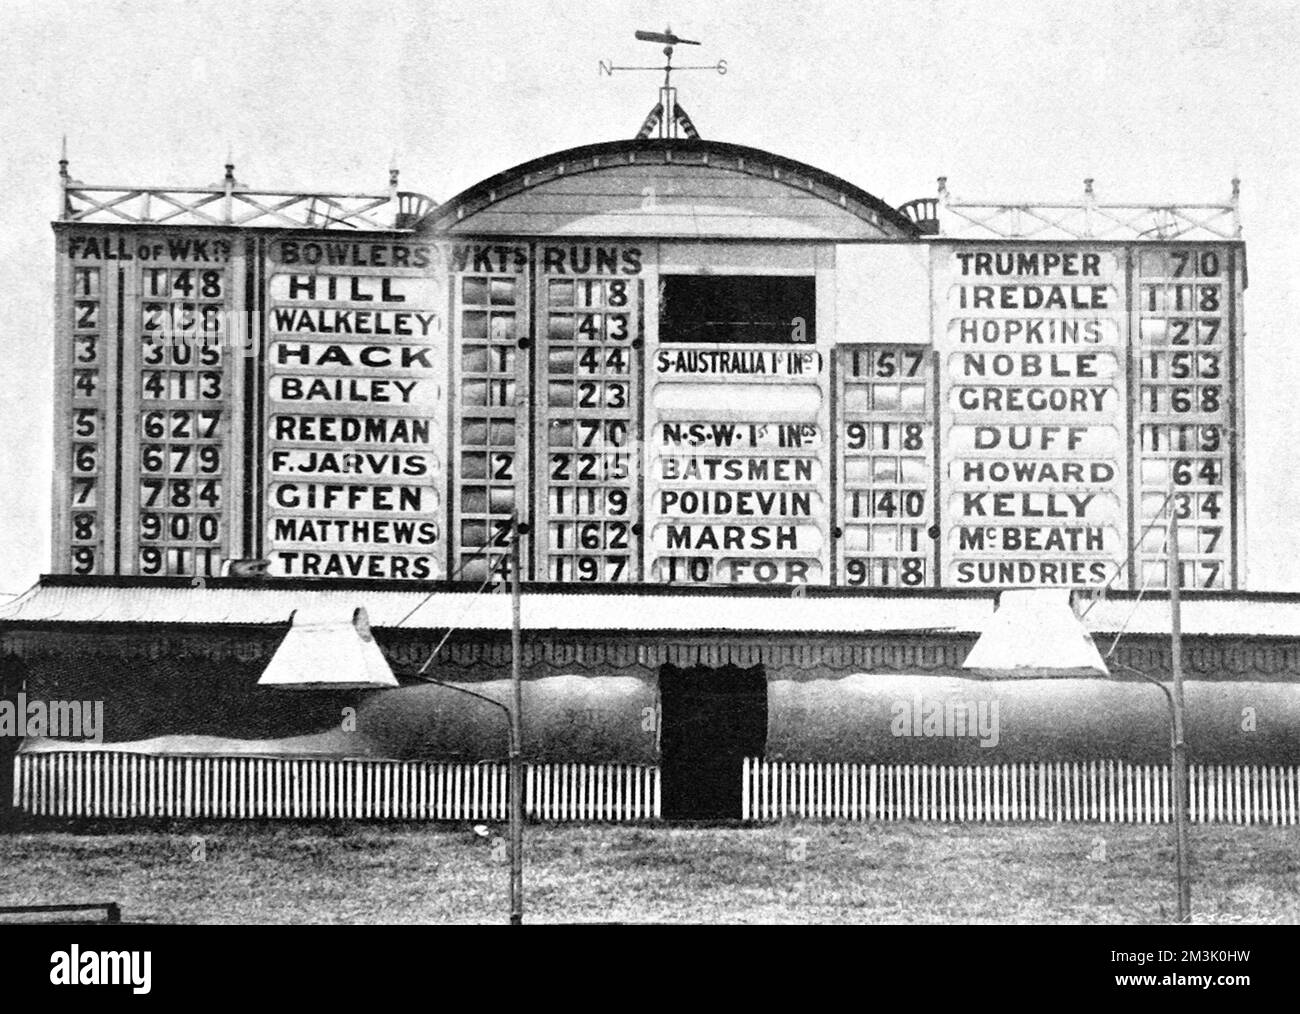 The Sydney Cricket Ground Score-board during the Sheffield Shield match between New South Wales and South Australia, 8th January 1901.   New records were made as New South Wales scored 918 all out, with five of their players scoring centuries.  1901 Stock Photo